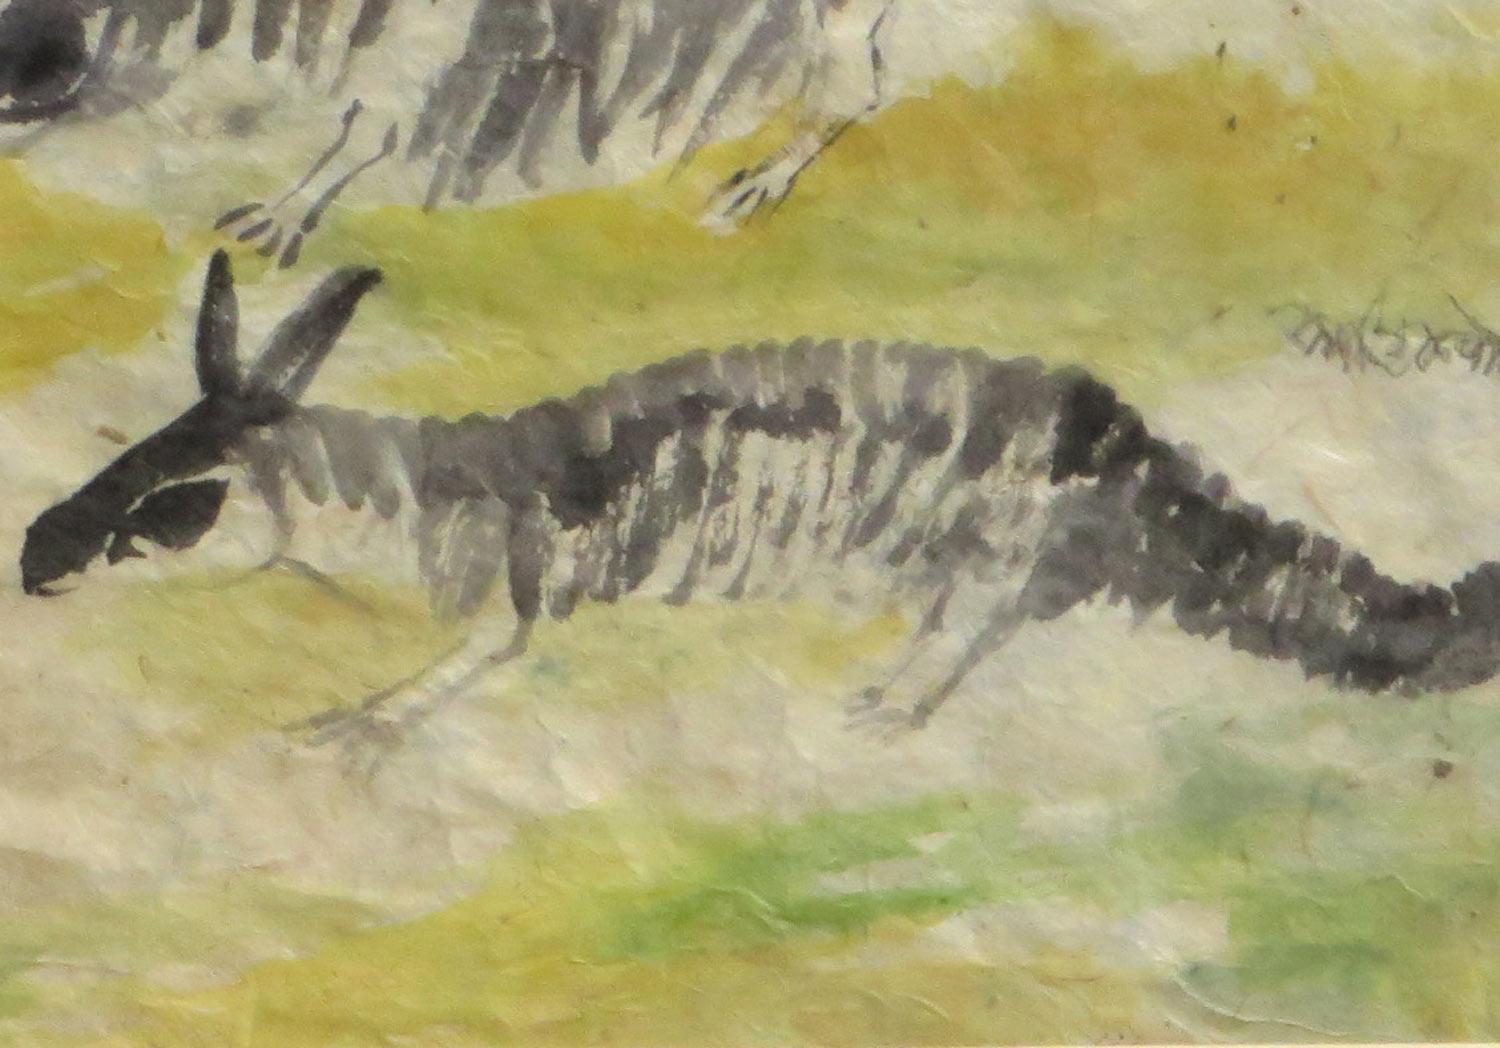 squirrels, Watercolor on Rice paper, Brown, Green, Yellow by K.C. Pyne